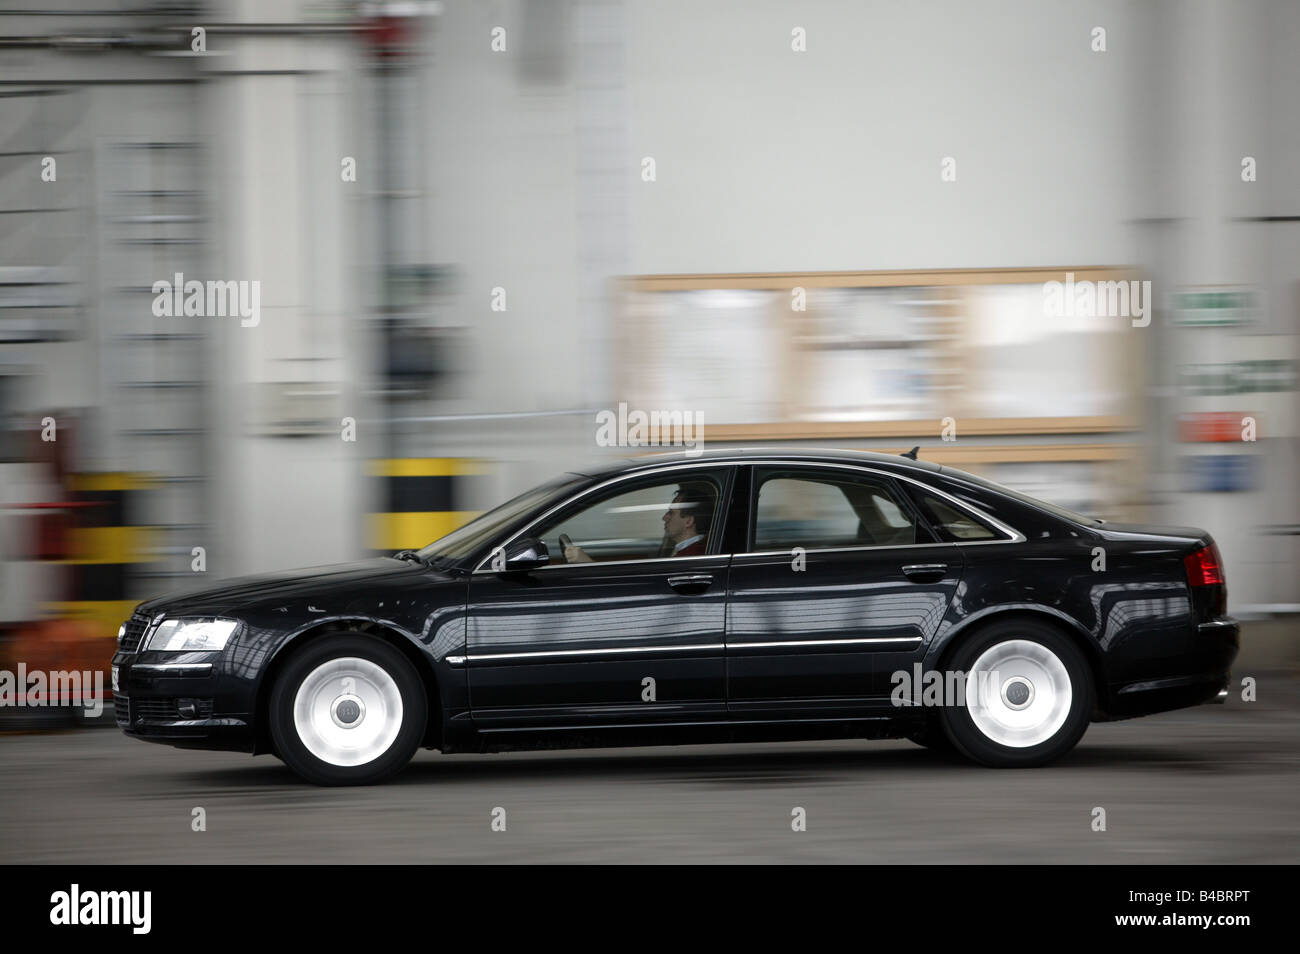 Car, Audi A8 4.2 Quattro, Limousine, Luxury approx.s, model year 2002-, V8, black, driving, side view, photographer: Achim Hartm Stock Photo